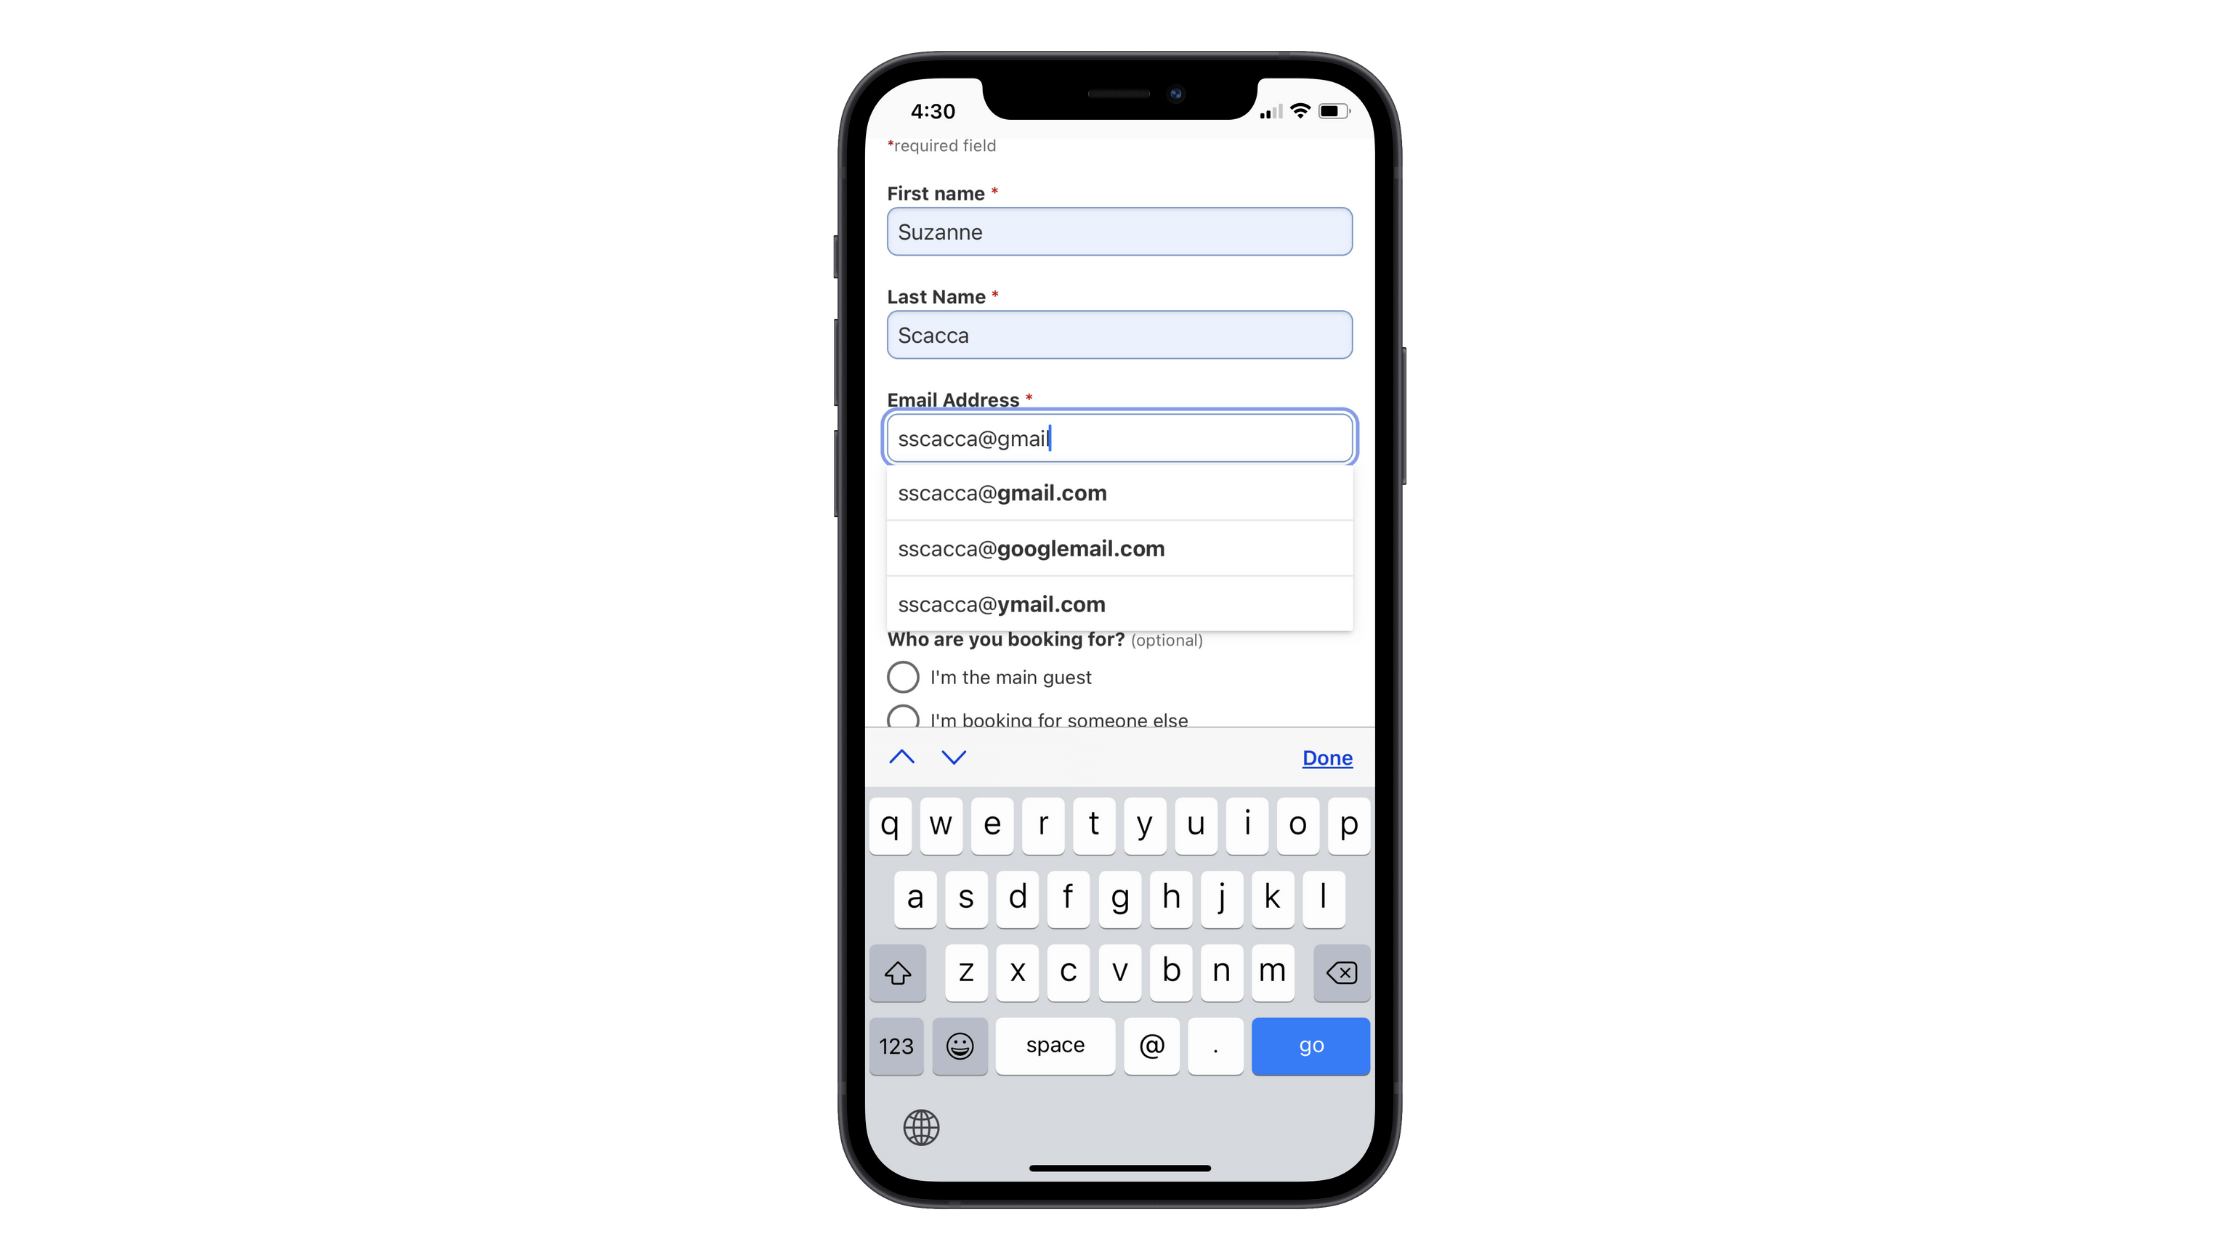 Booking.com helps users fill out its checkout form with autofill. In this example, the customer has started to fill out their email address. When the “@” is typed, autofill options for @gmail.com, @googlemail.com, and @ymail.com appear.